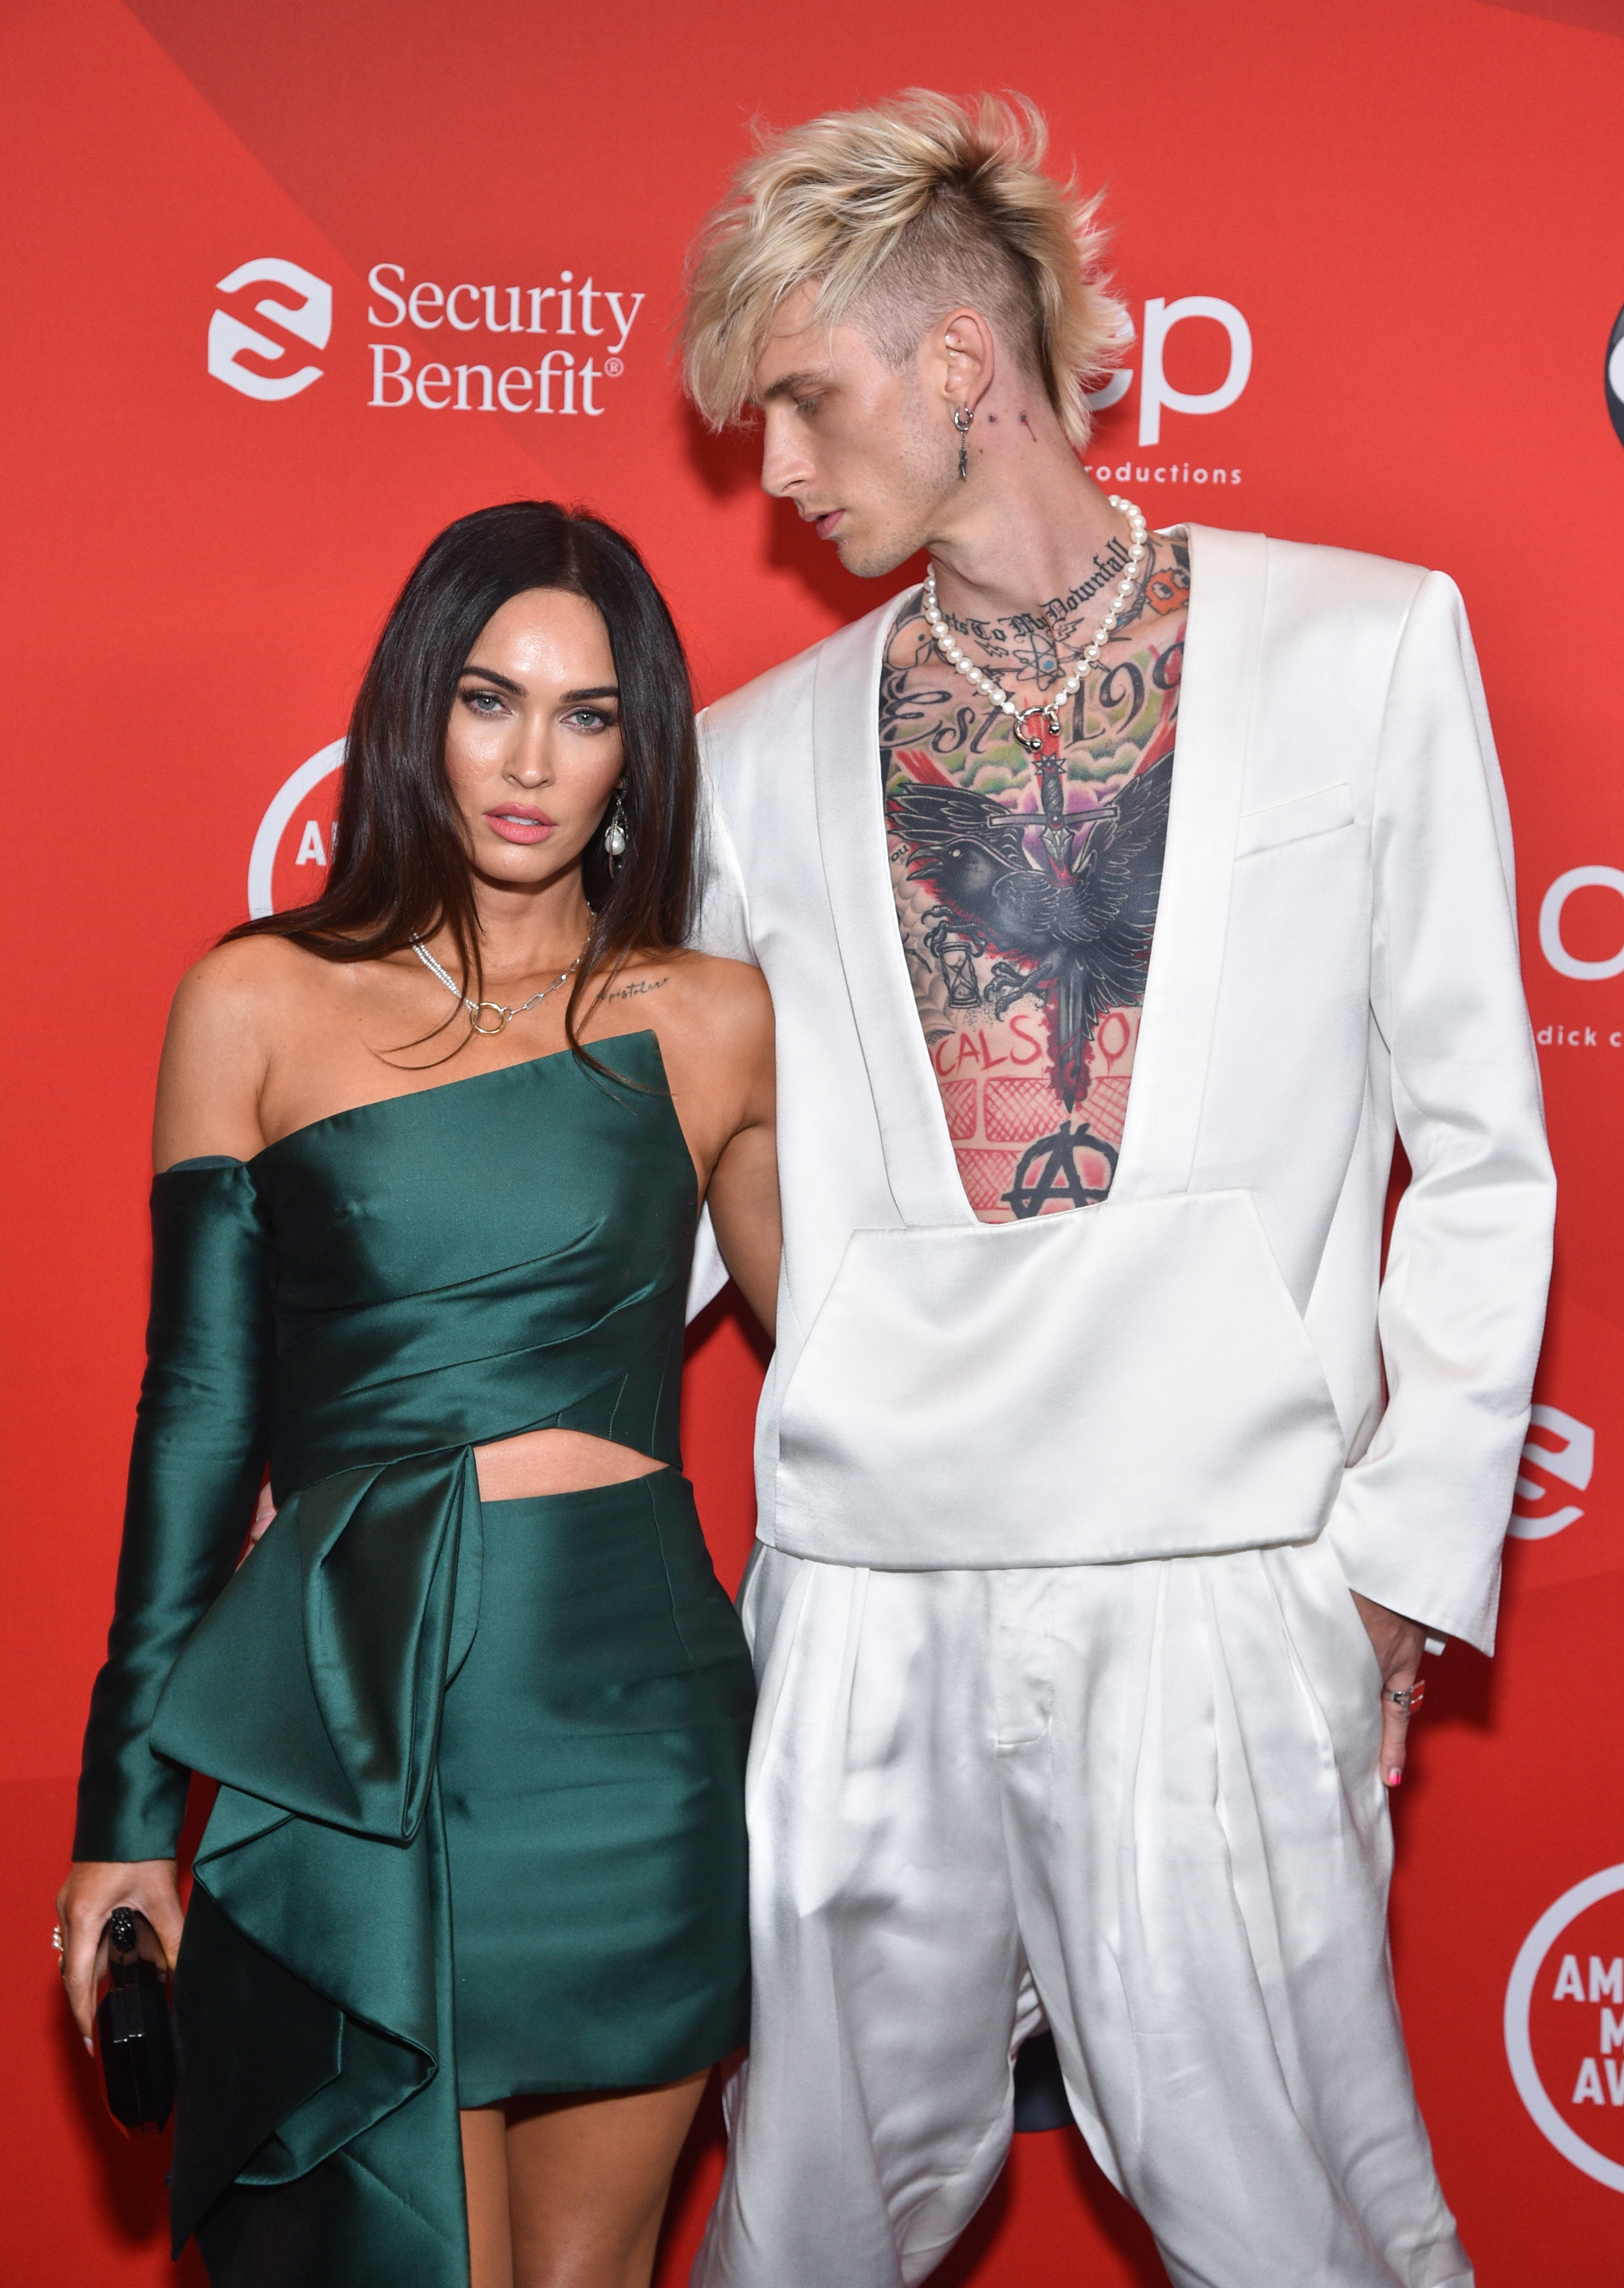 MGK looks down on Megan while posing on a red carpet